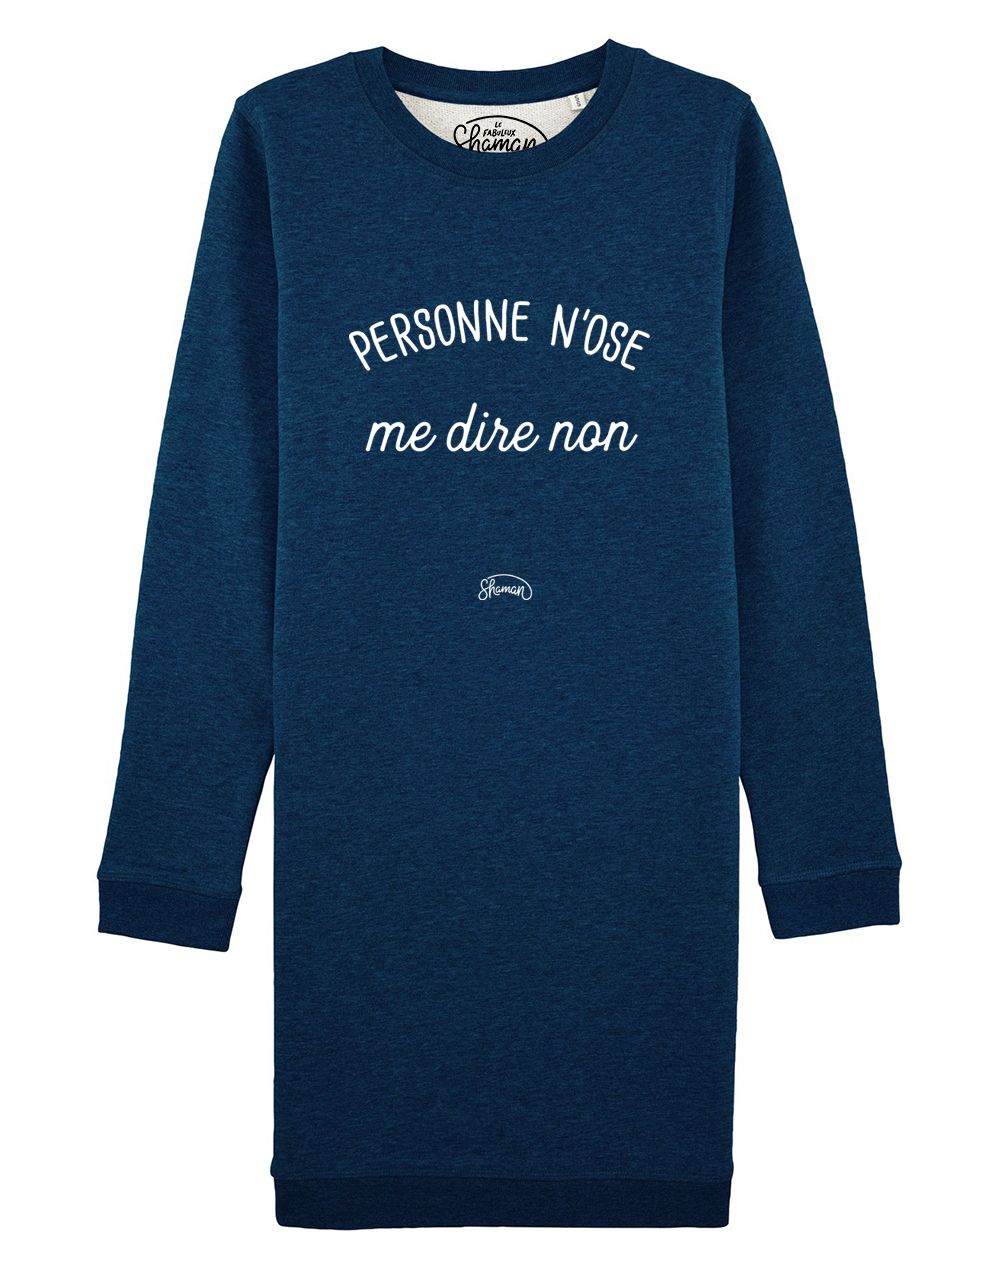 Sweat Robe "Personne n'ose me dire non"